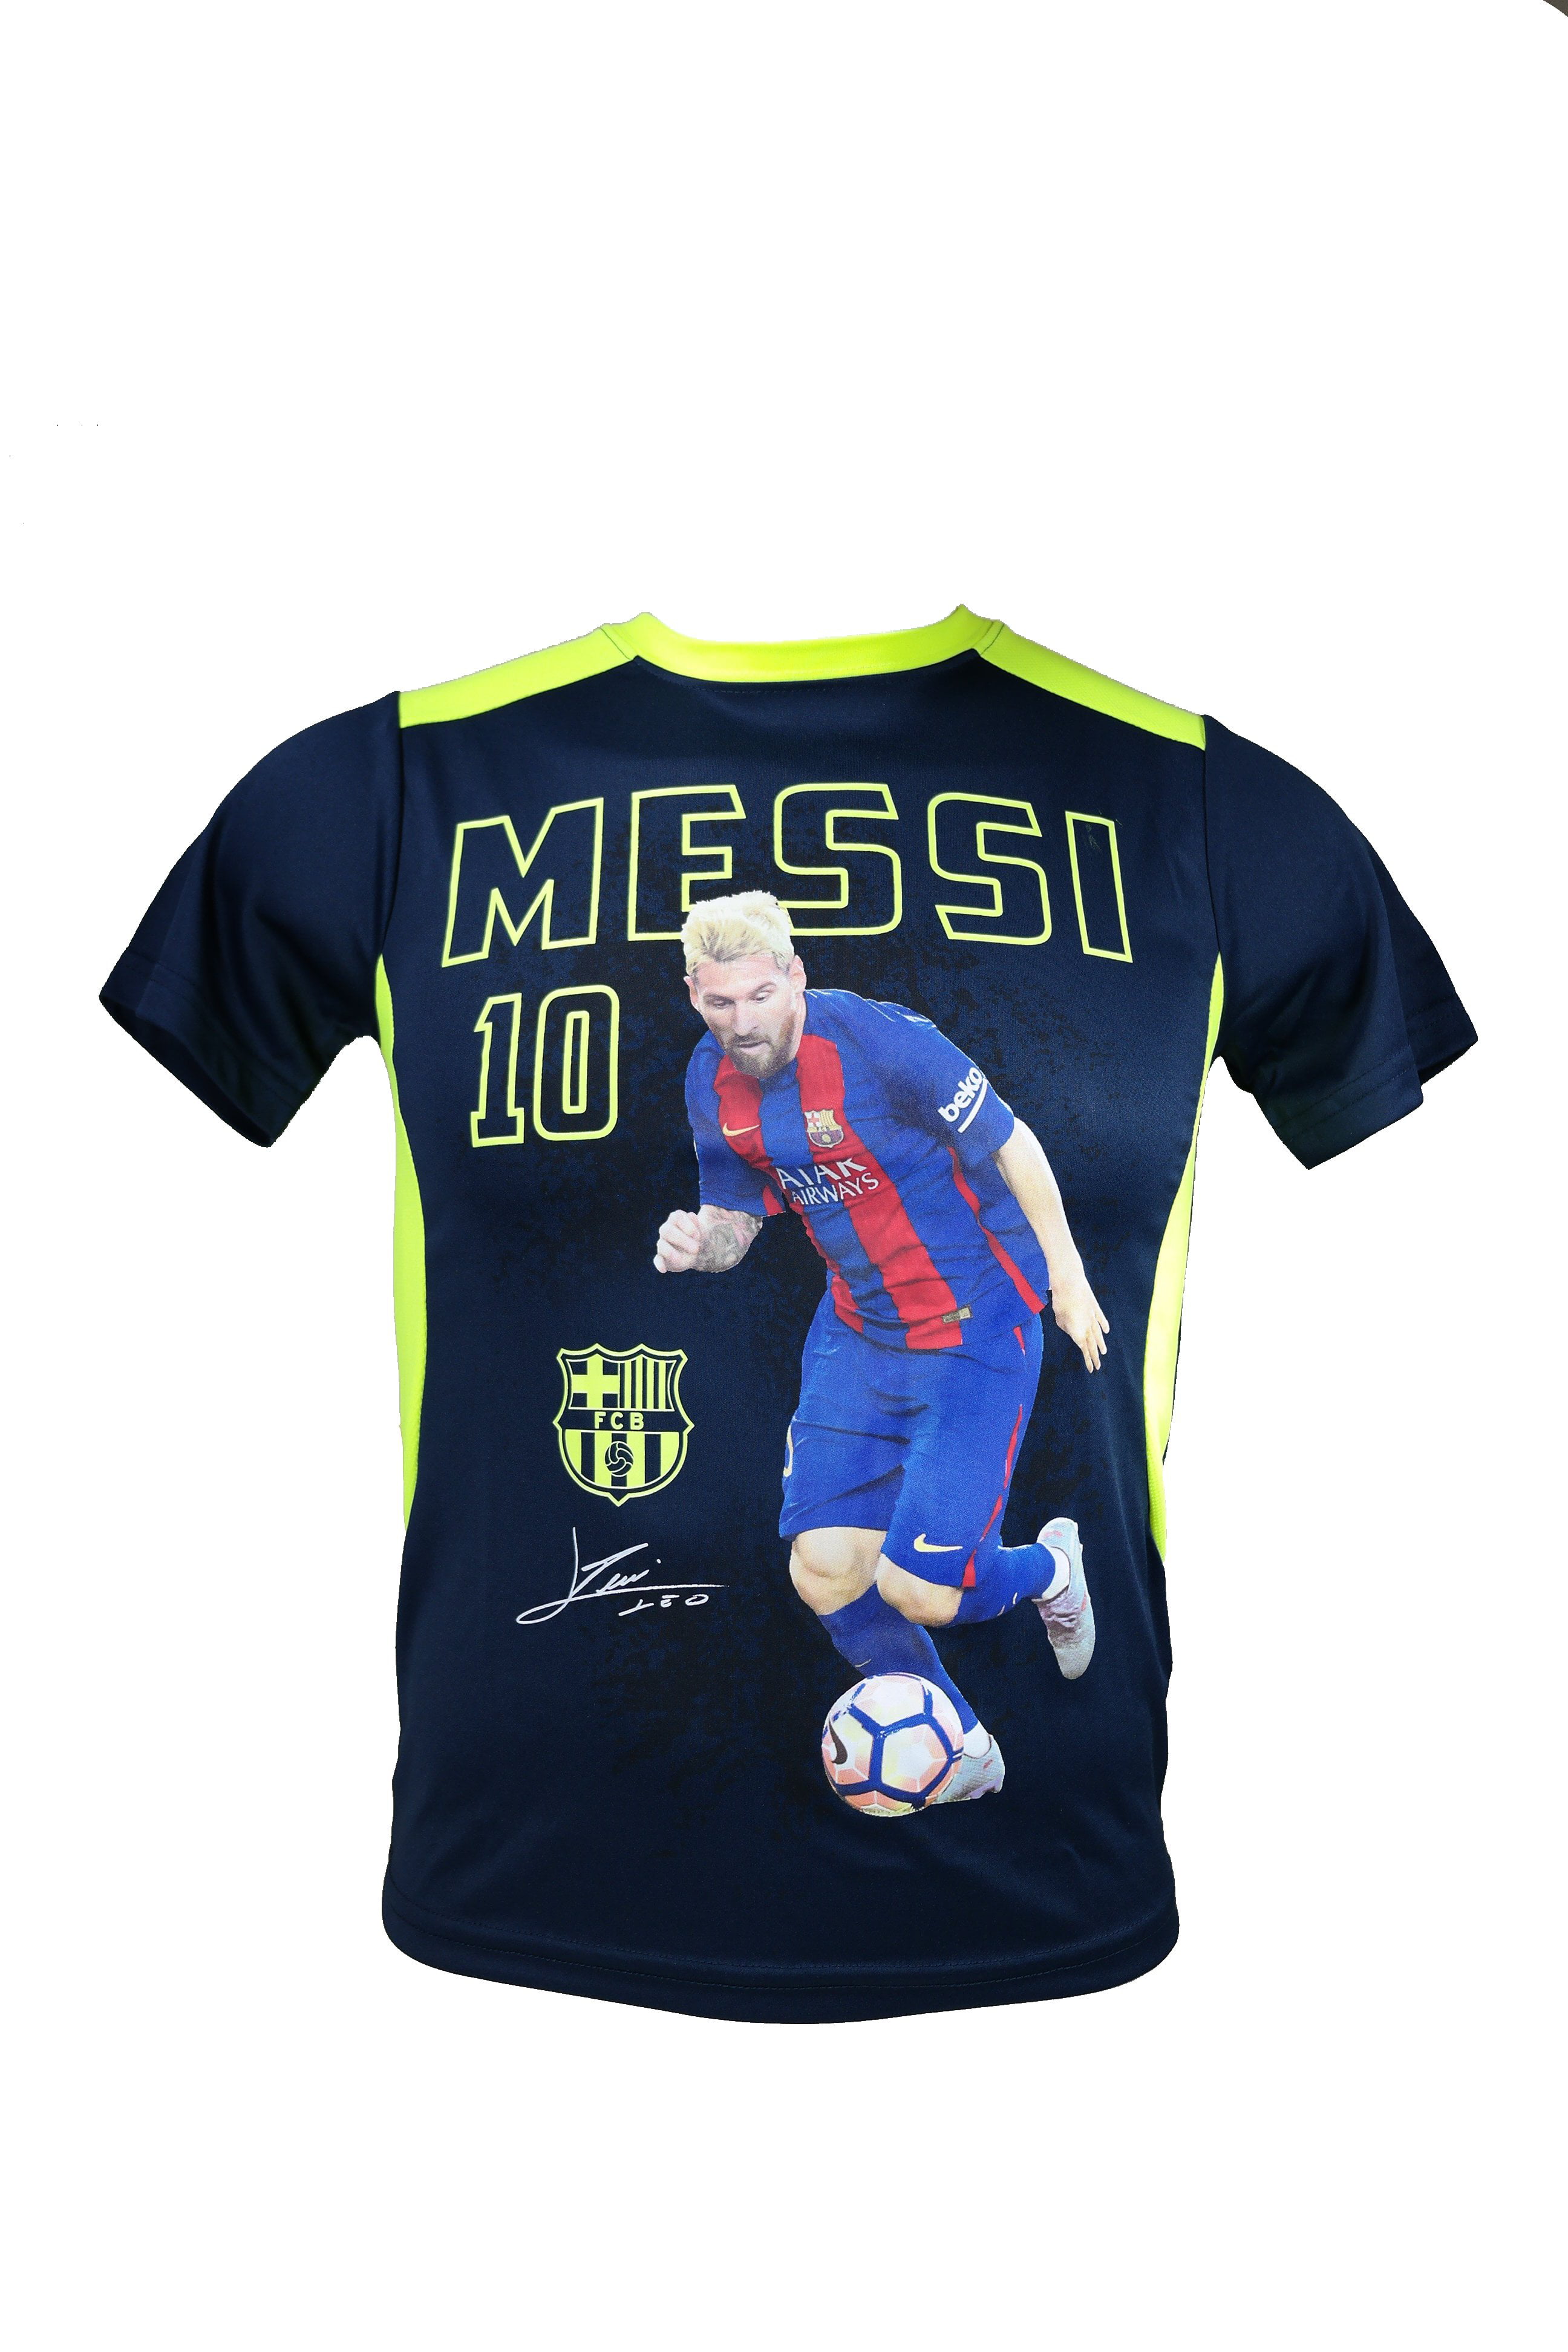 official messi jersey youth